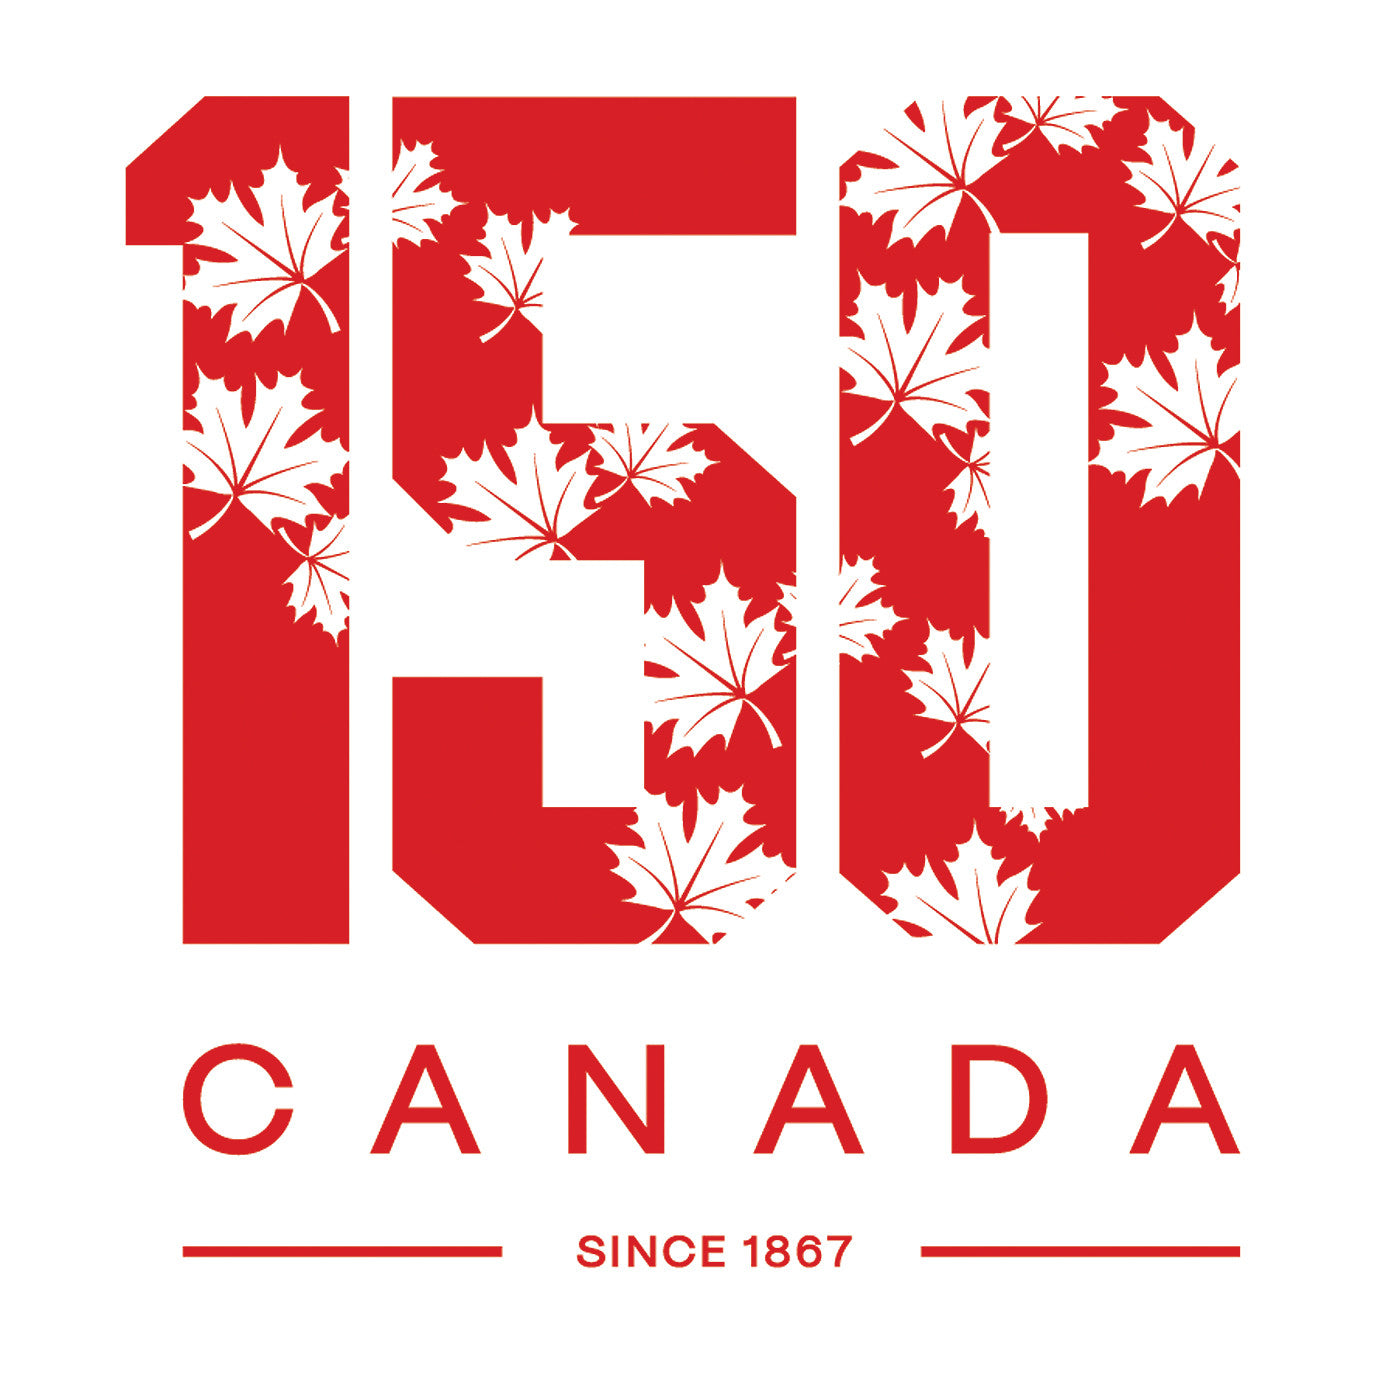 Let's Celebrate Canada's 150th – Leather-Moccasins